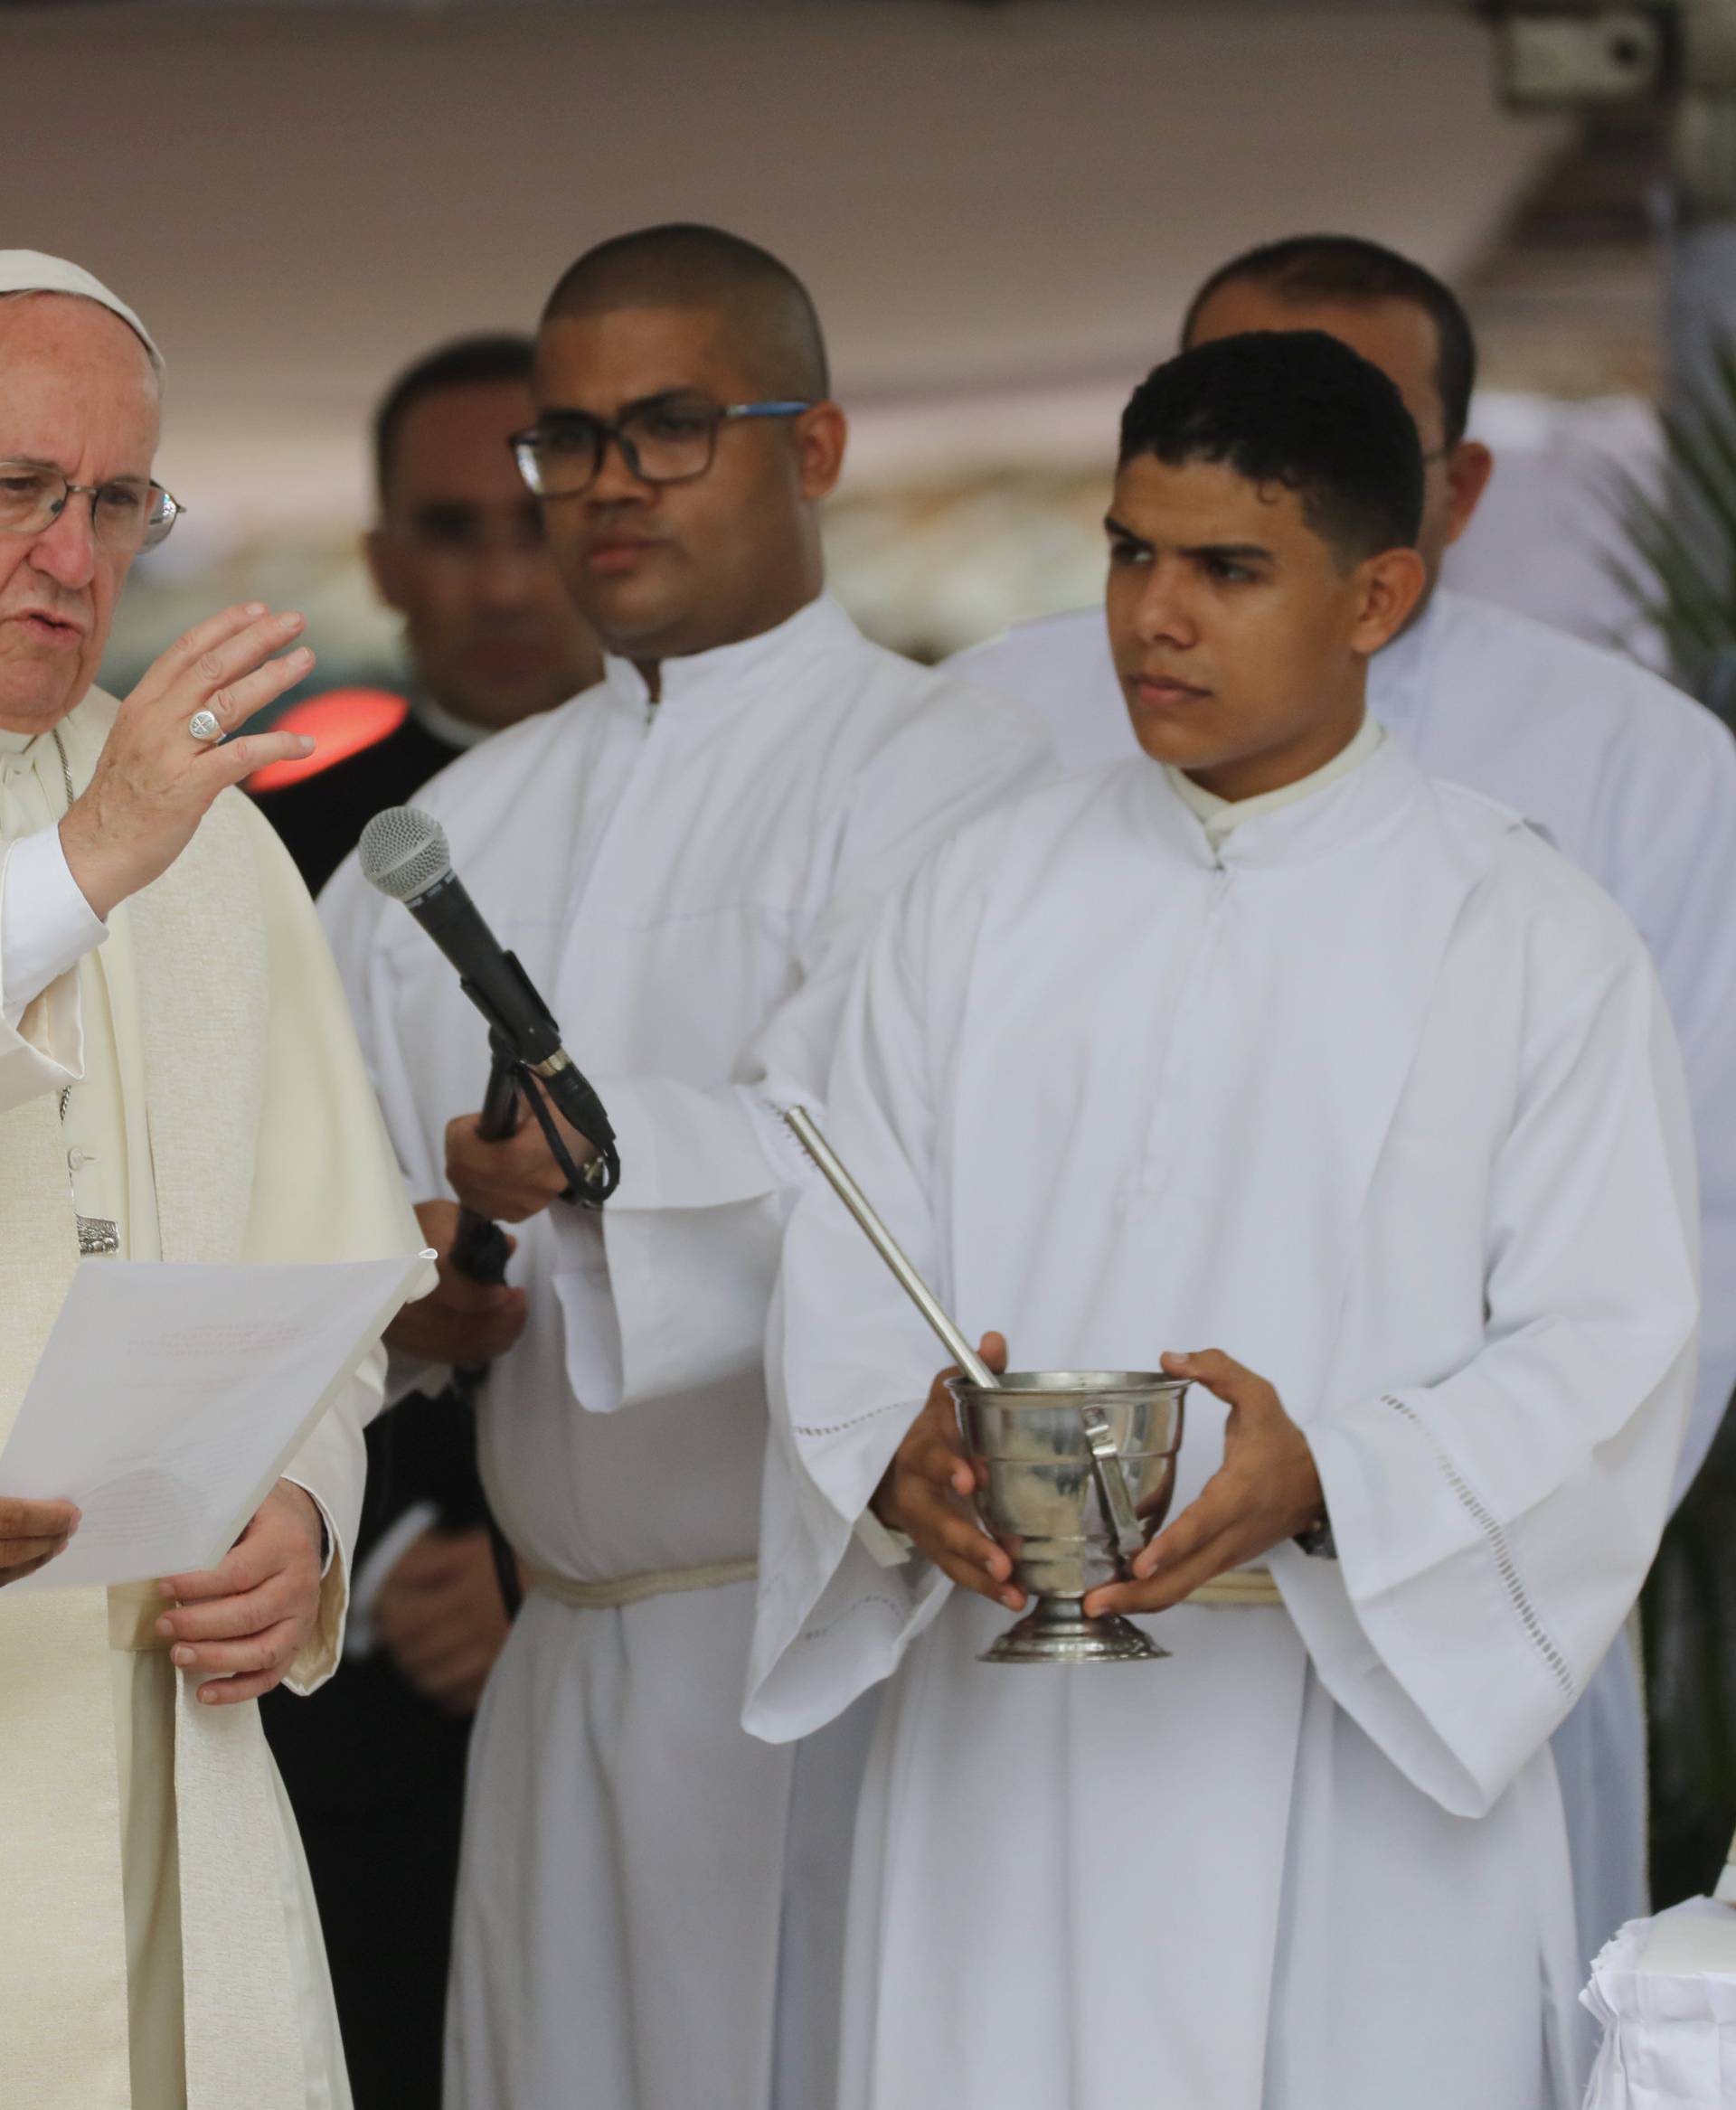 Pope Francis gives a blessing during a visit to San Francisco neighbourhood in Cartagena